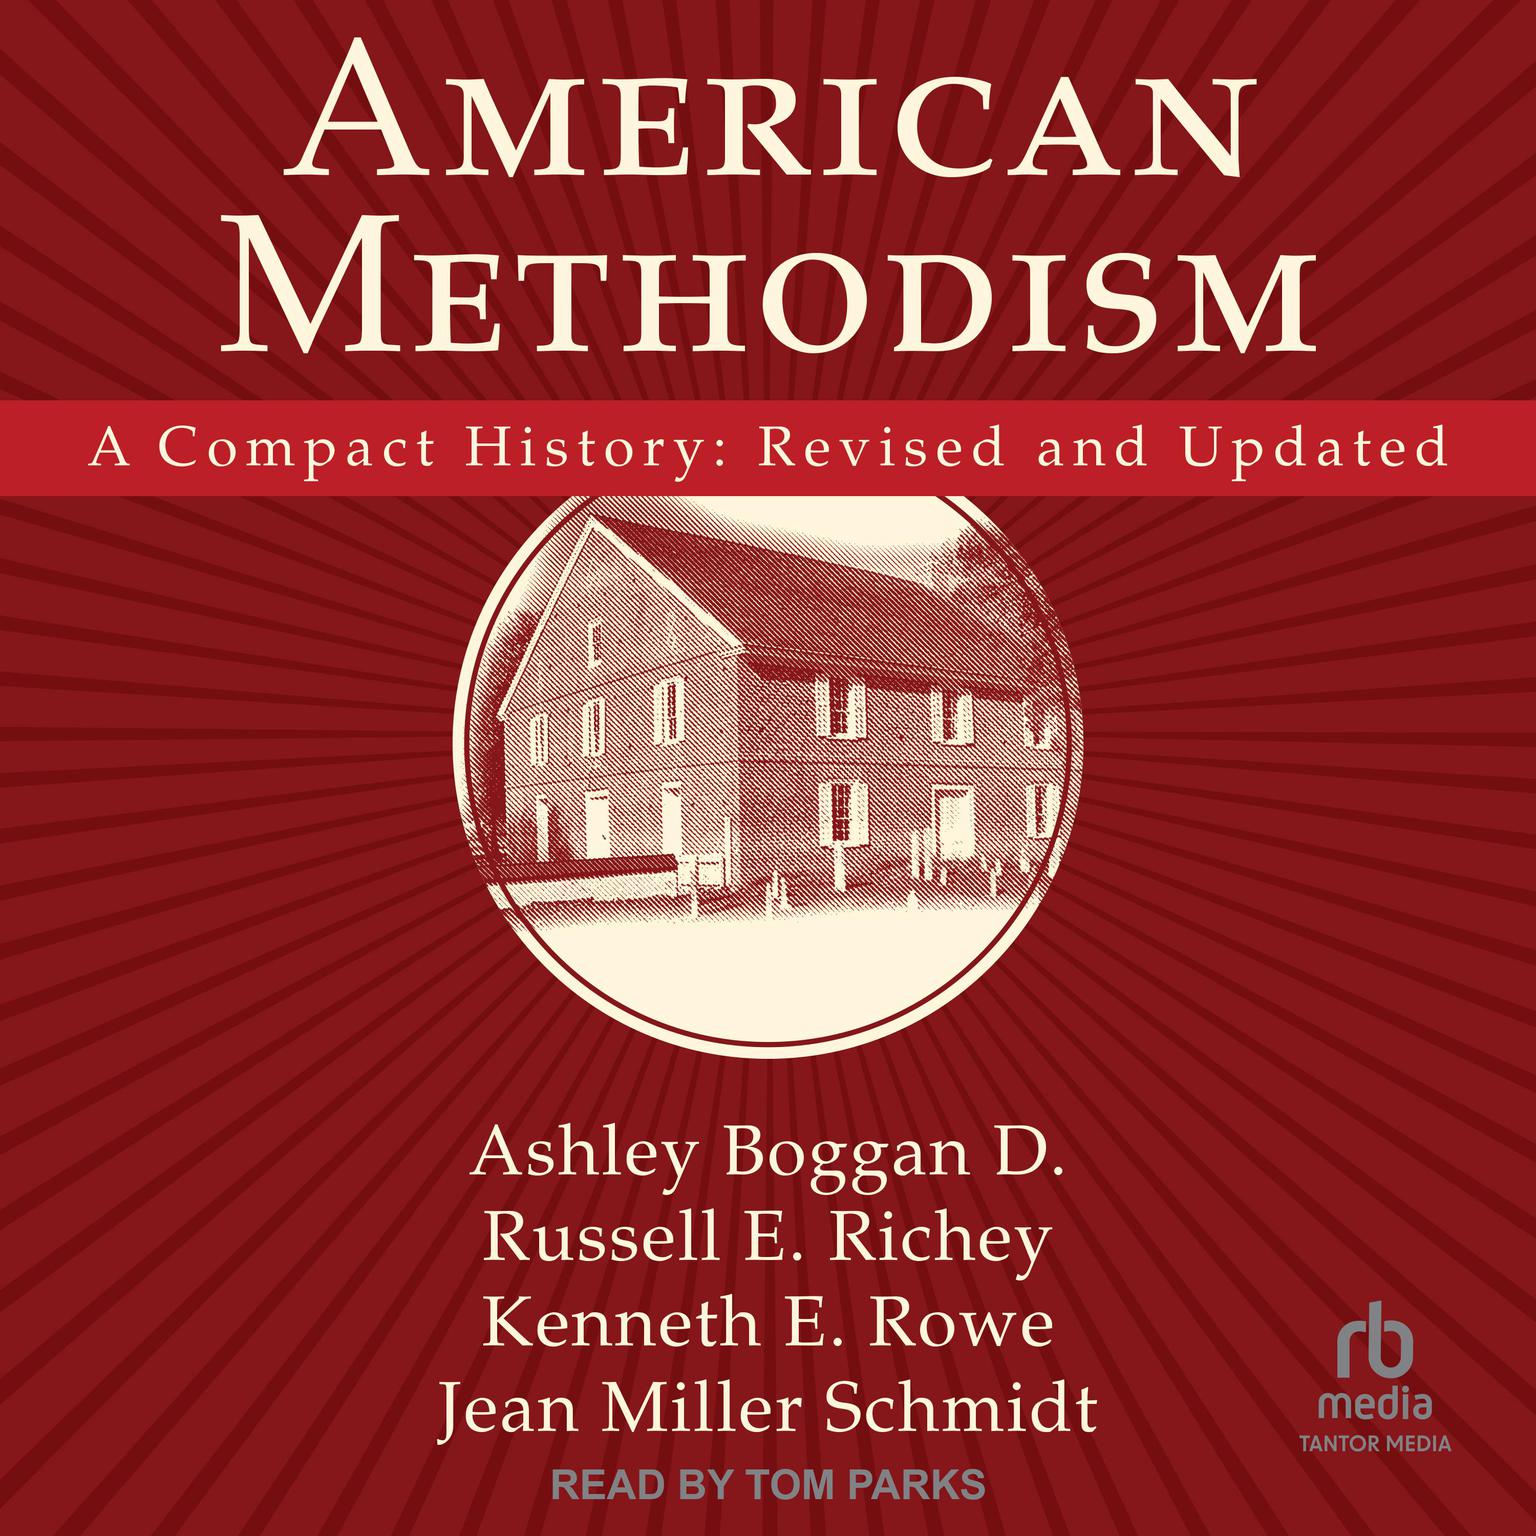 American Methodism: A Compact History: Revised and Updated Audiobook, by Ashley Boggan D.